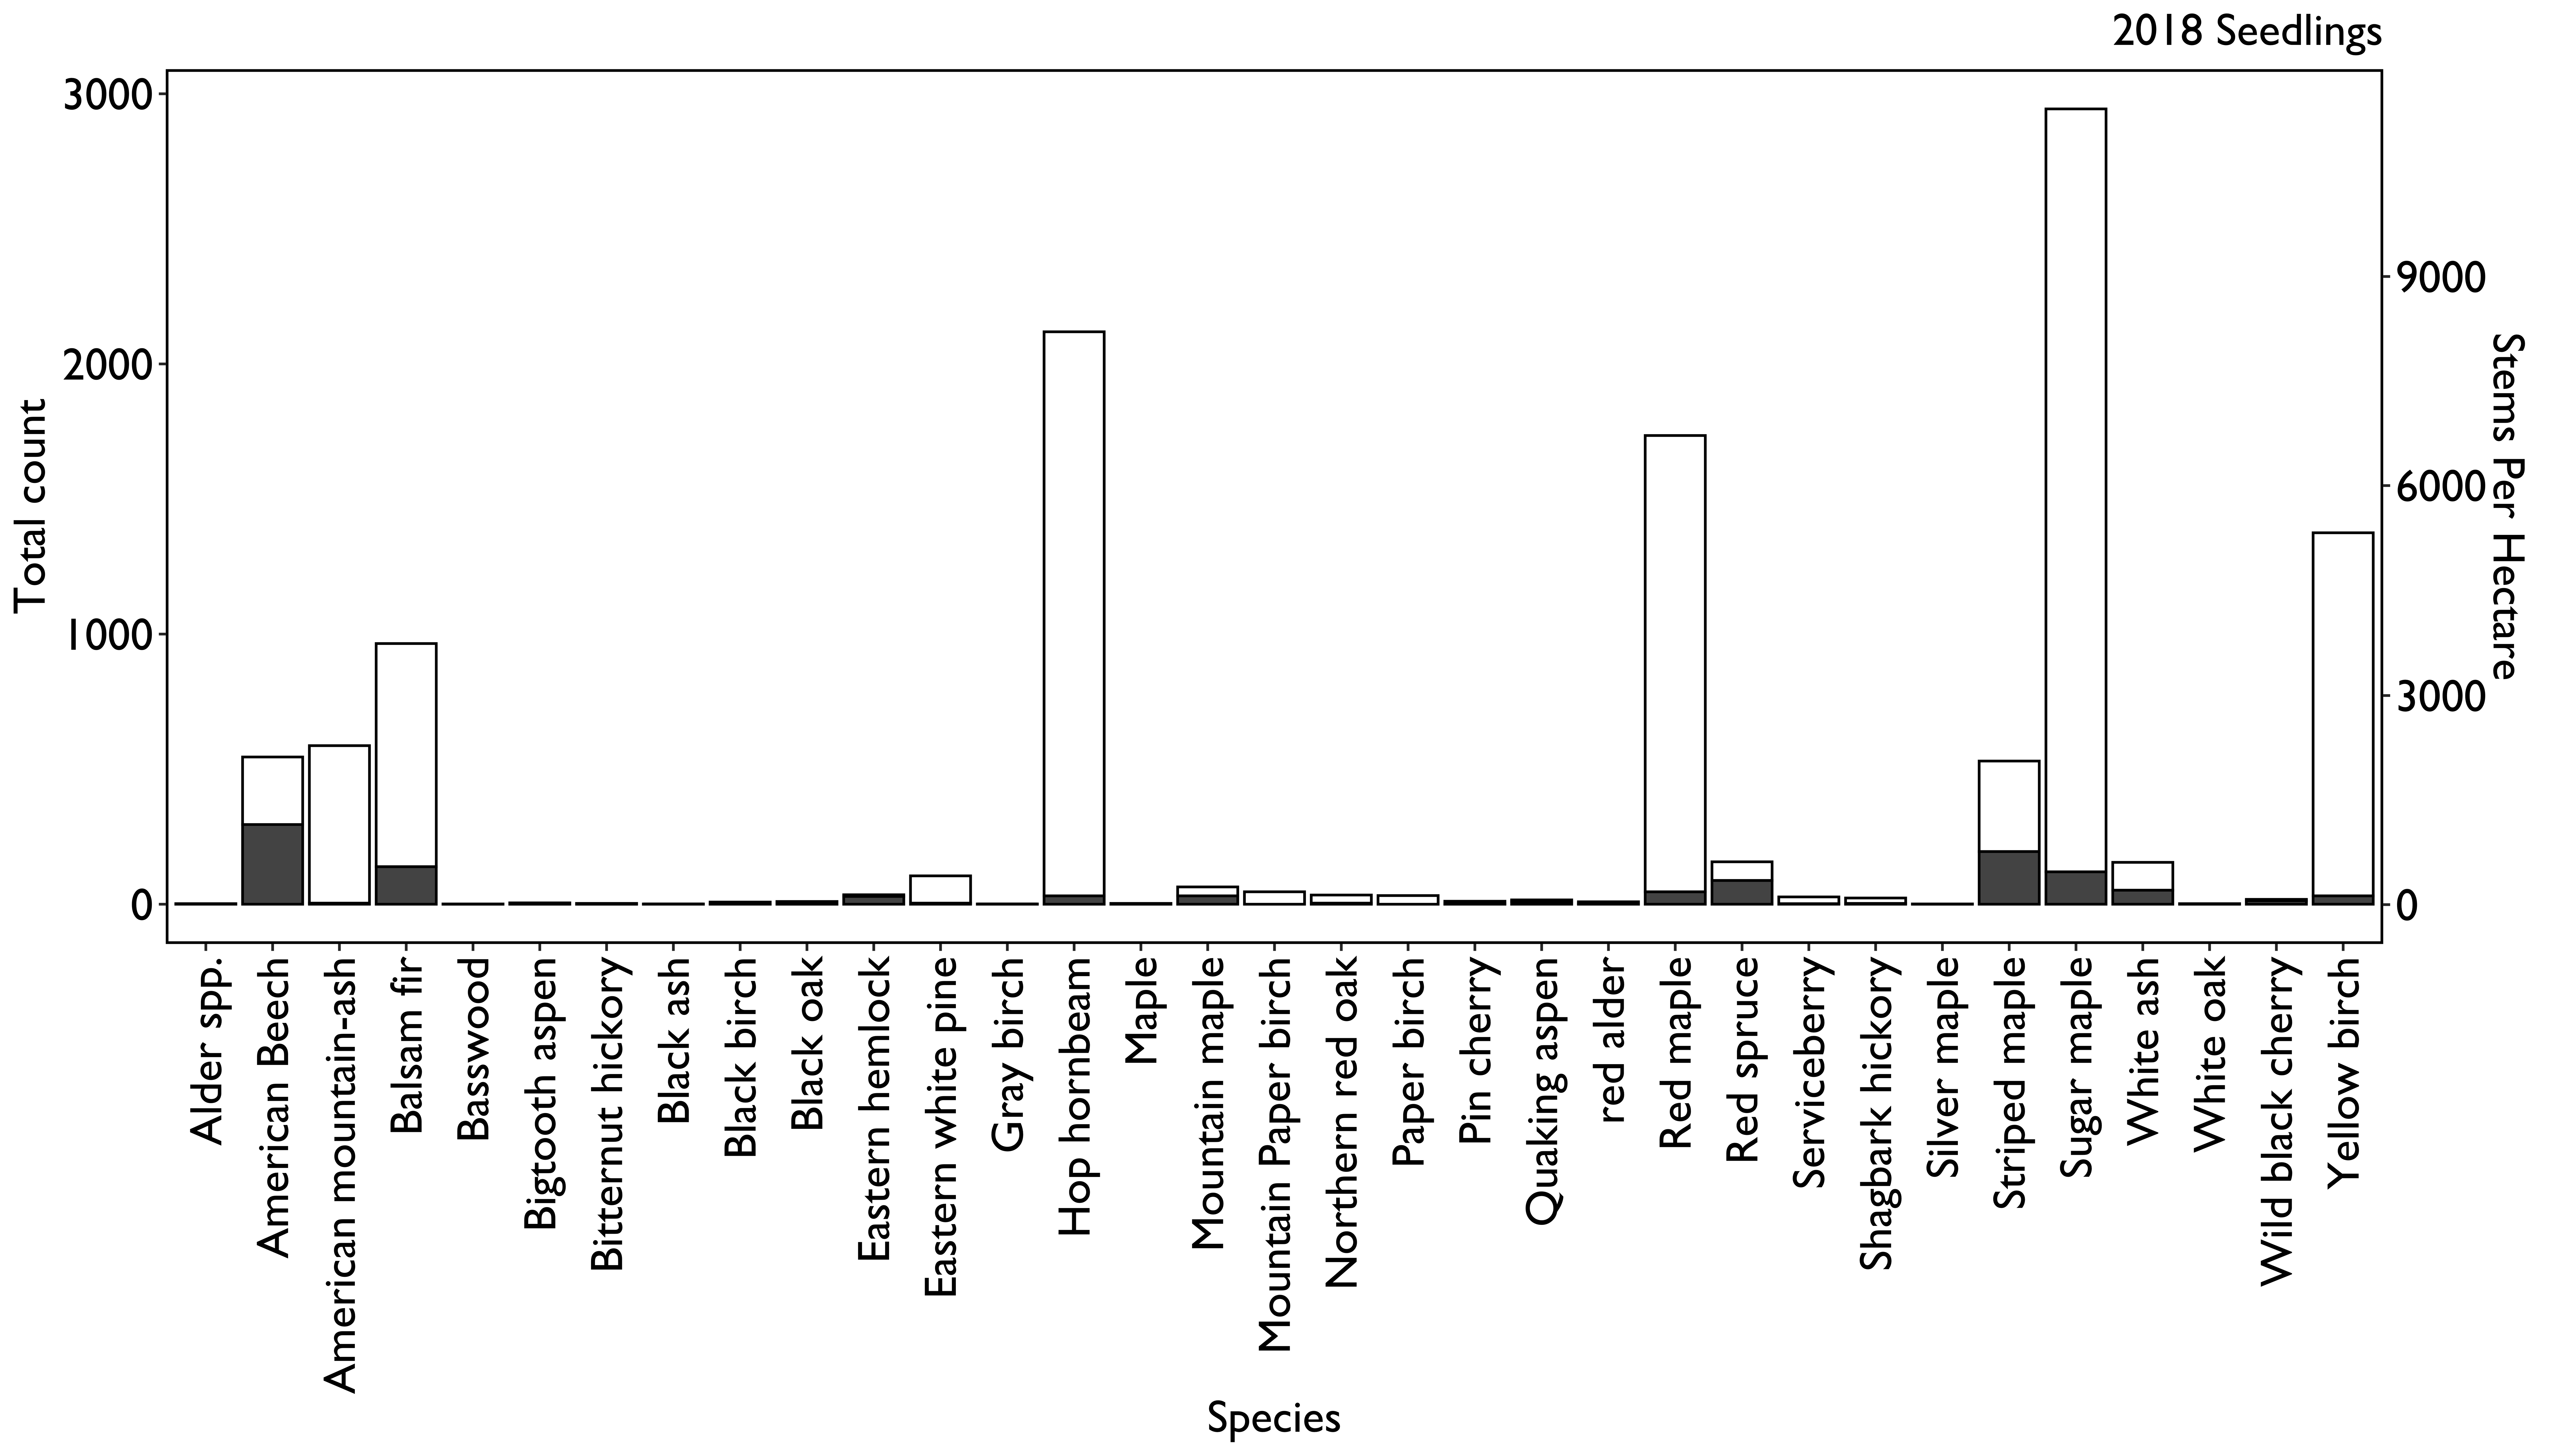 Figure 2. Species composition of all seedlings tallied across the 2018 FEMC Forest Health Monitoring plots. Seedling class 1 is depicted in white and seedling class 2 is depicted in black.